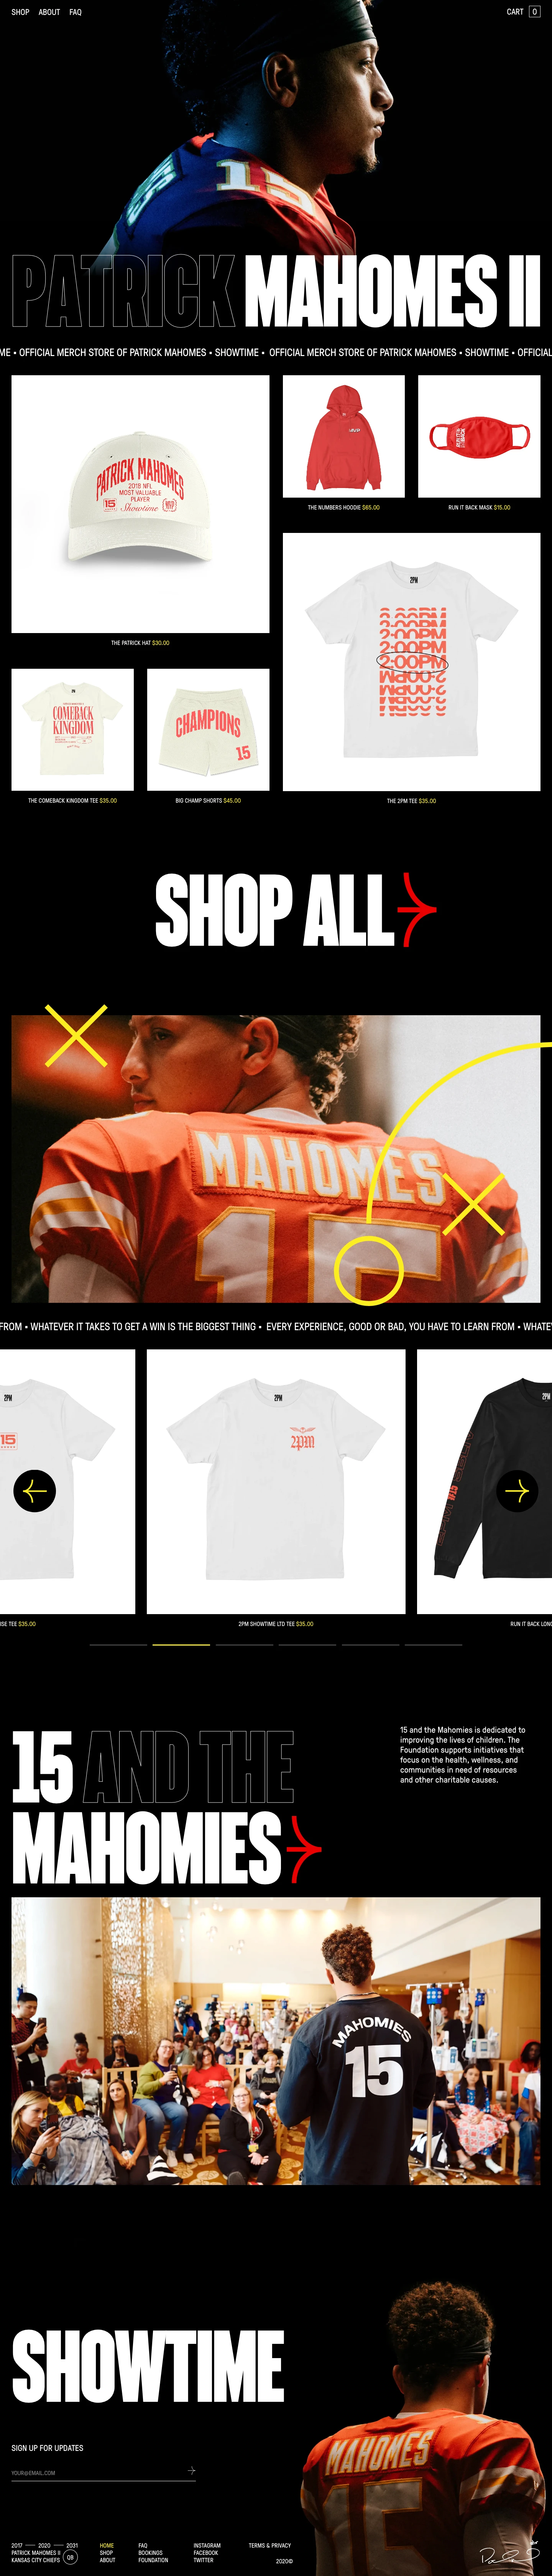 Patrick Mahomes Landing Page Example: In 2019, Patrick launched the 15 and the Mahomies Foundation, dedicated to improving the lives of children. The Foundation supports initiatives that focus on health, wellness, communities in need of resources and other charitable causes.